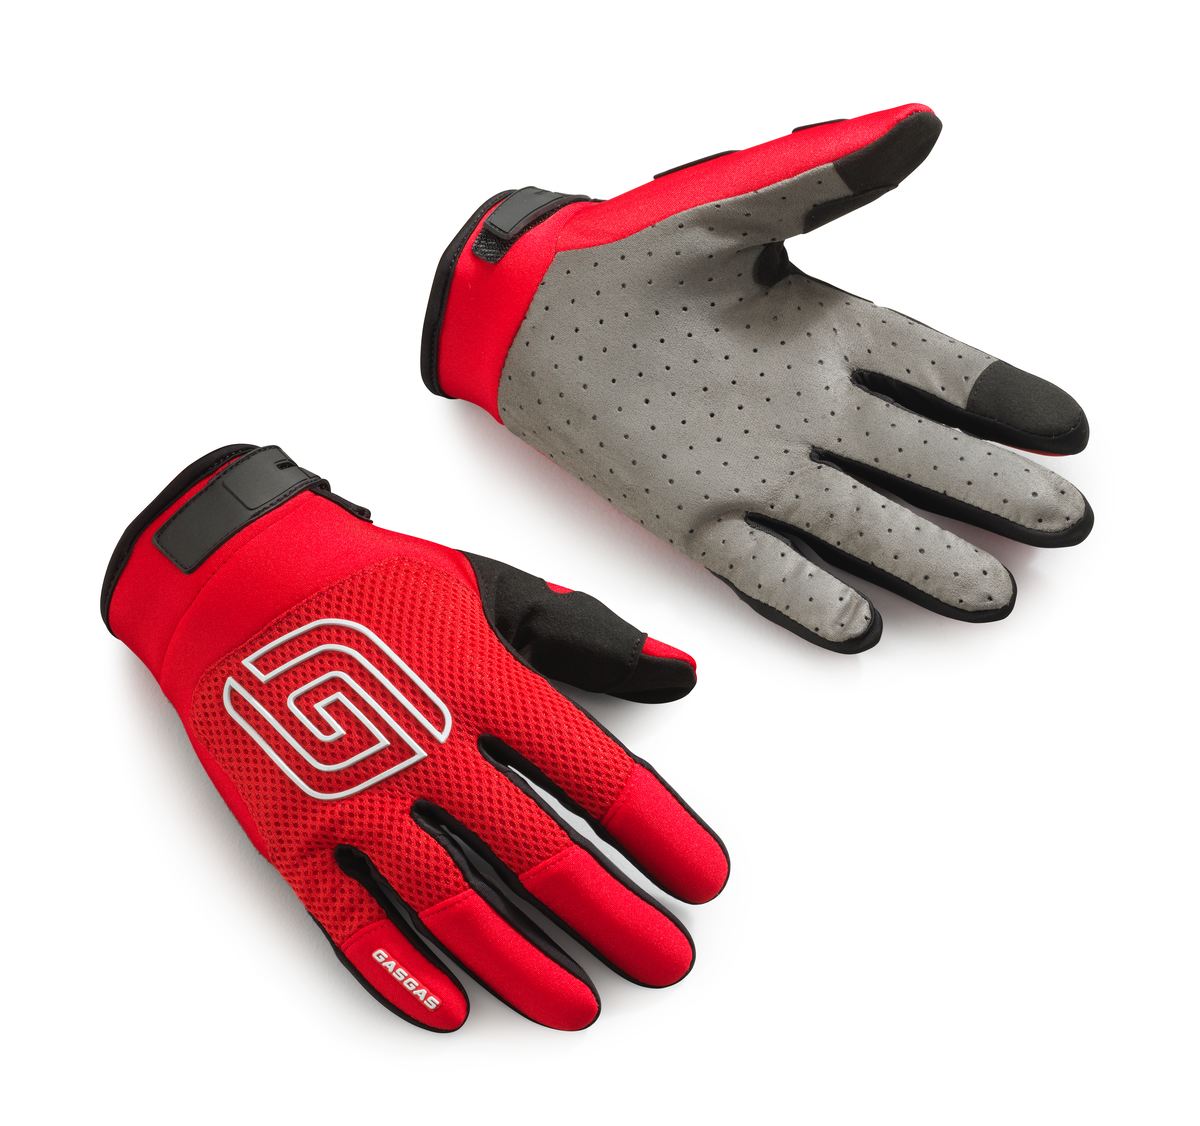 Main image of GasGas Offroad Gloves